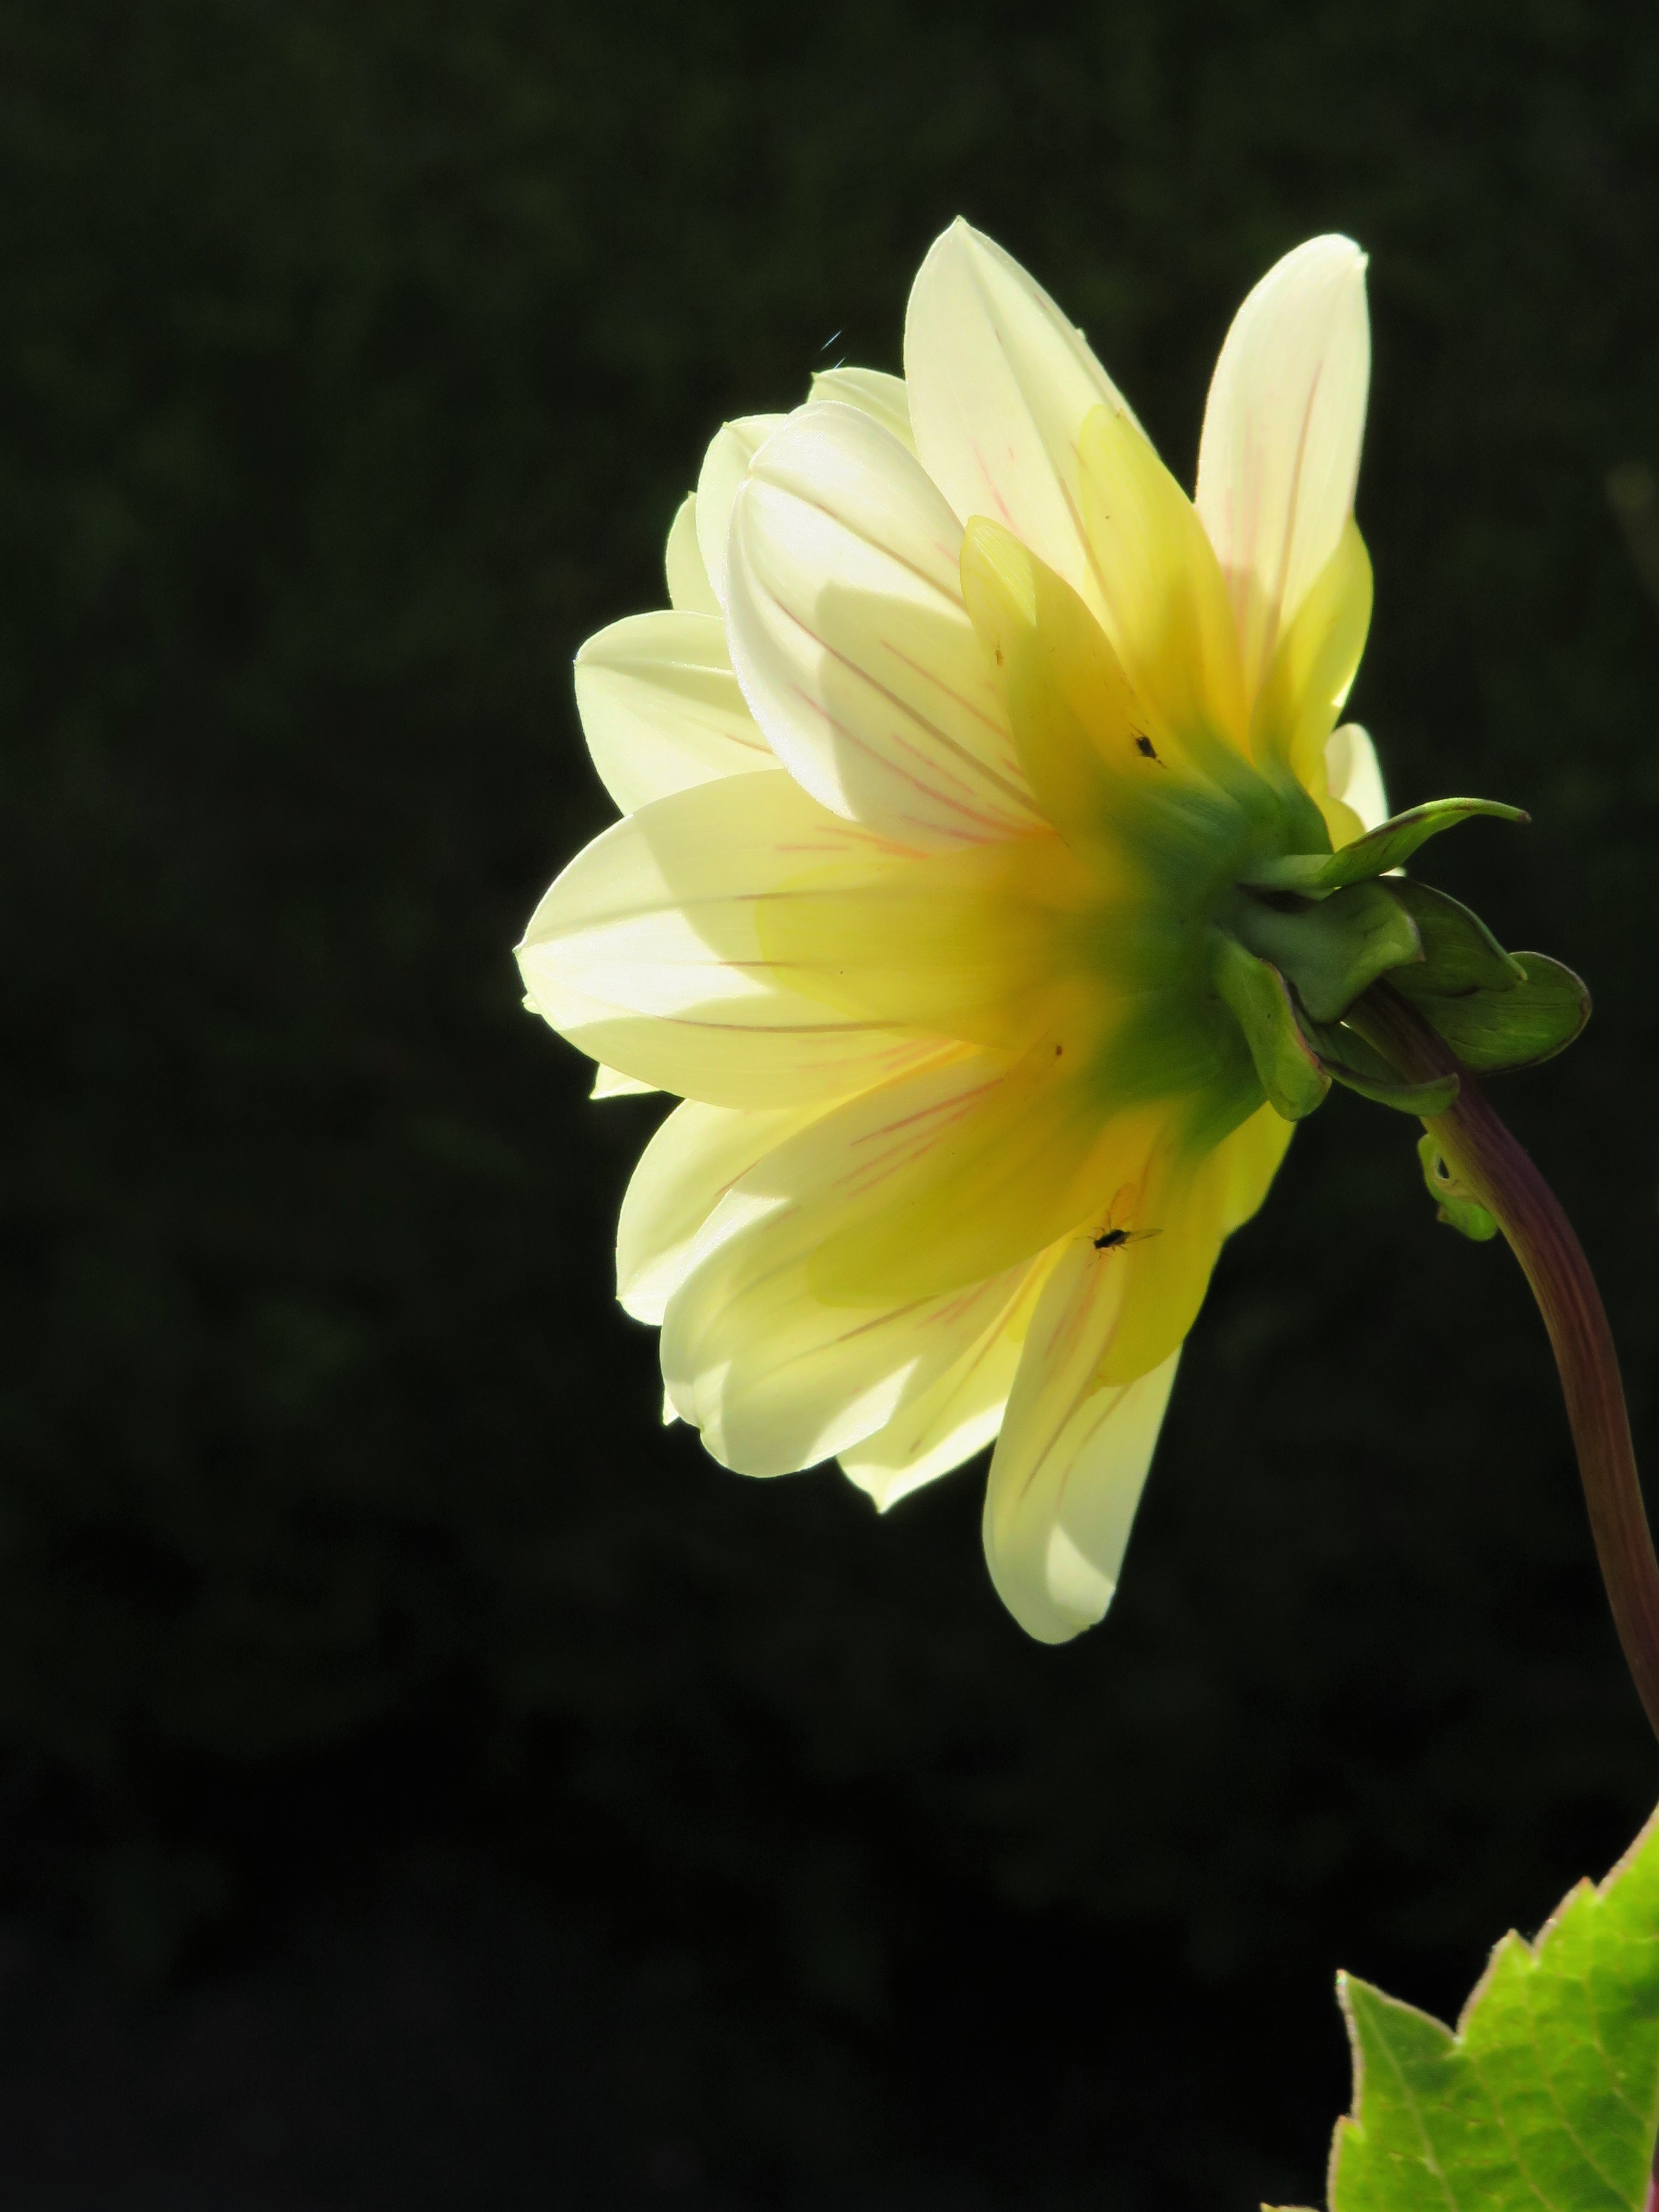 Yellow Flower Silhouette free image download